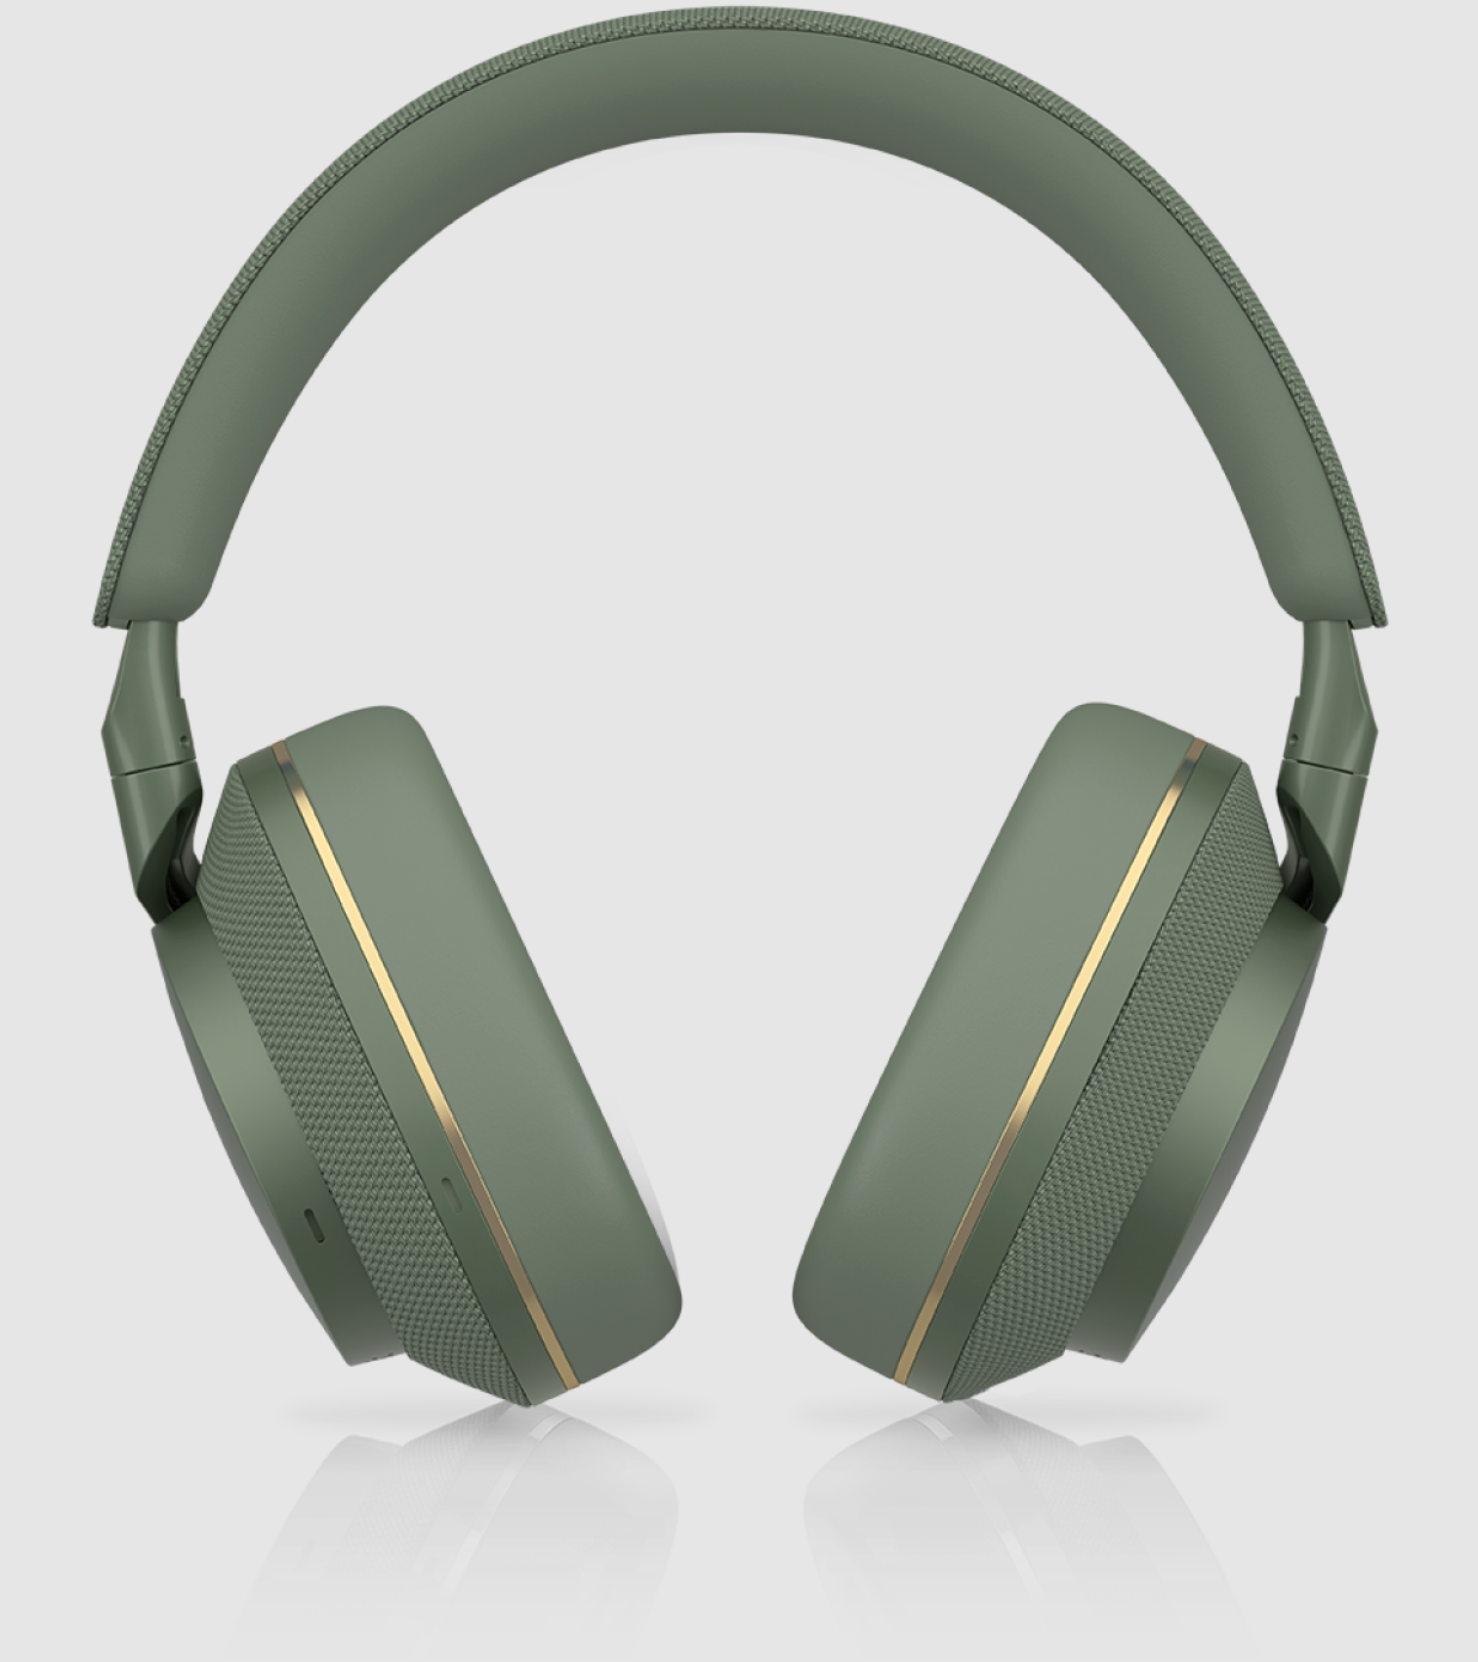 B&W Px7 S2e Noise Cancelling Headphones in Forest Green. Image of front